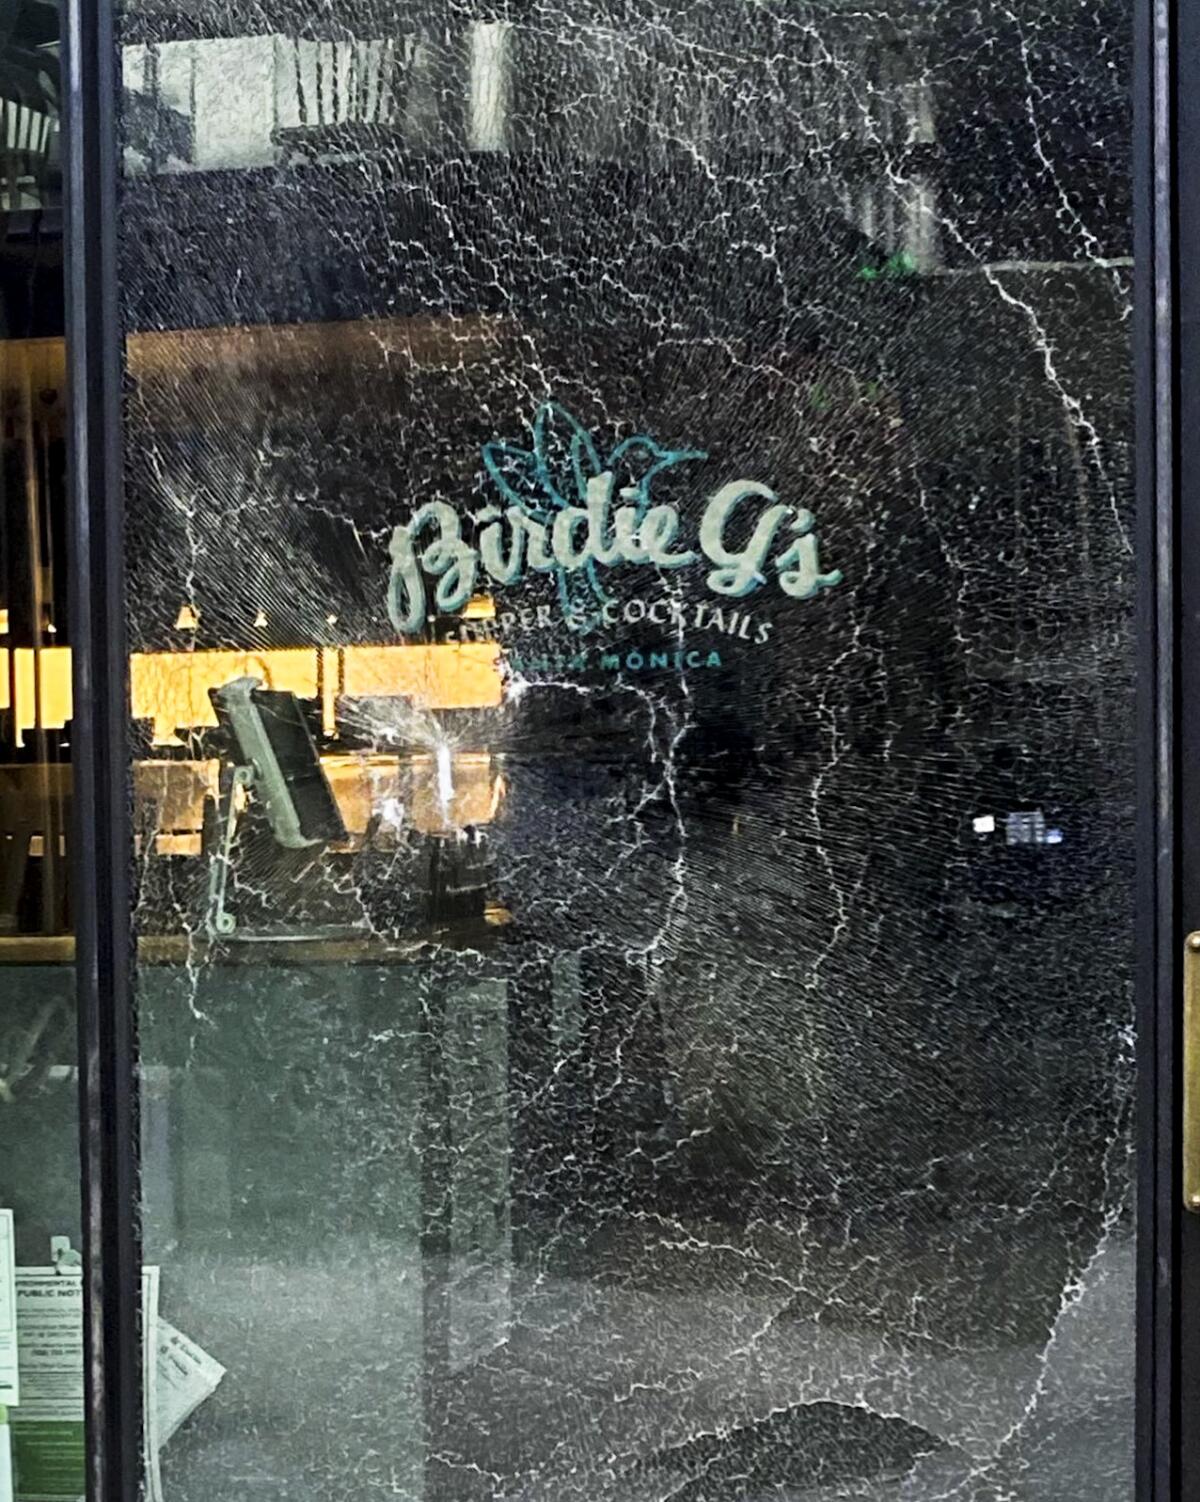 A smashed window that says "Birdie G's"